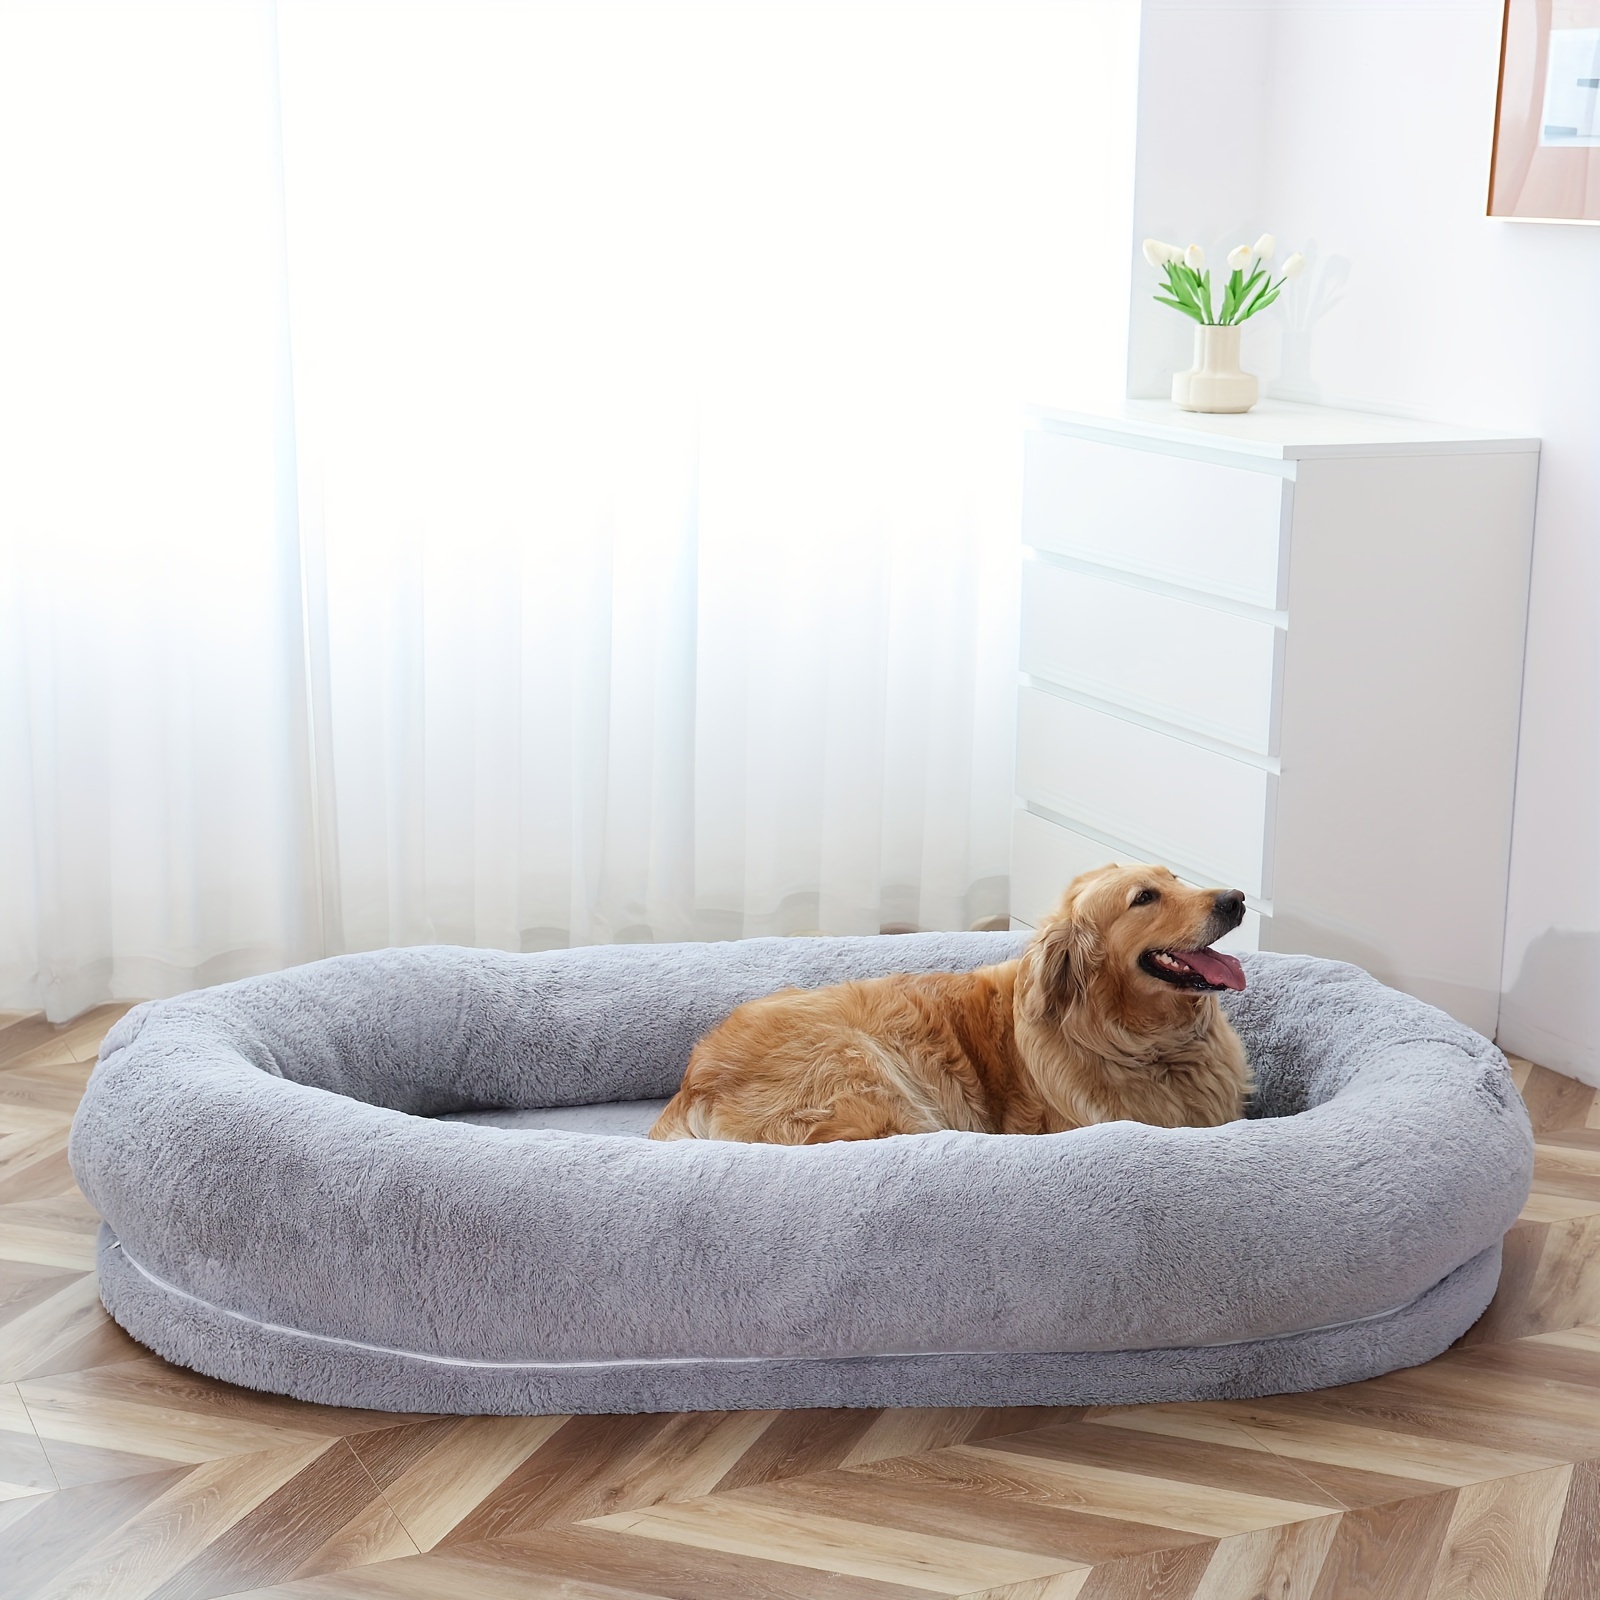 

Lilypelle Oversized Bed, 71"l×47.2"w×12"h Human Size Dog Bed With Washable Faux Fur Cover, Large Dog Bean Bag Bed For Families, Grey